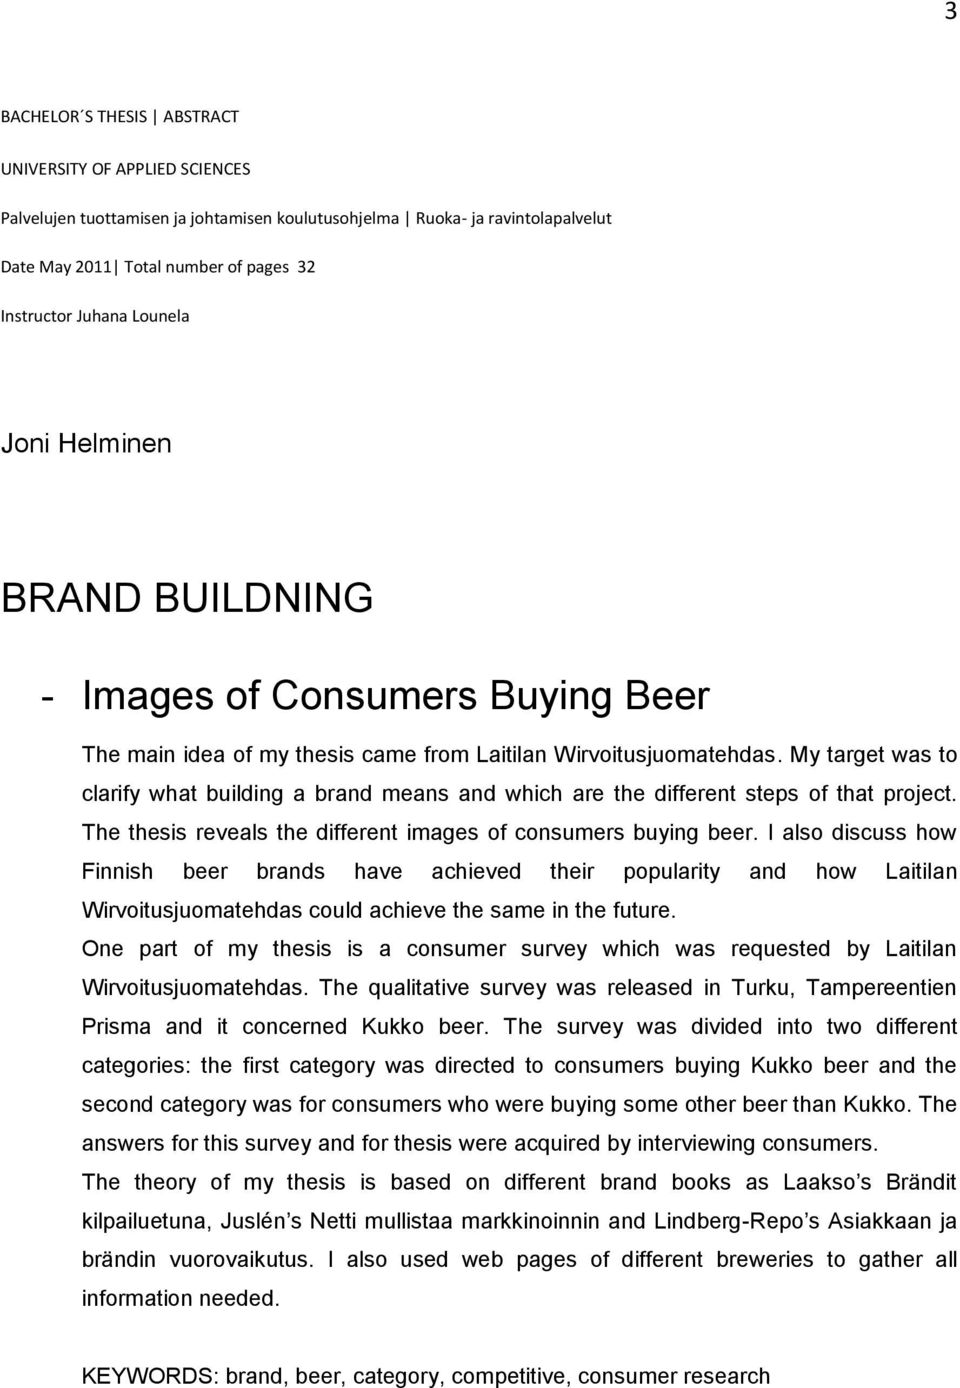 My target was to clarify what building a brand means and which are the different steps of that project. The thesis reveals the different images of consumers buying beer.